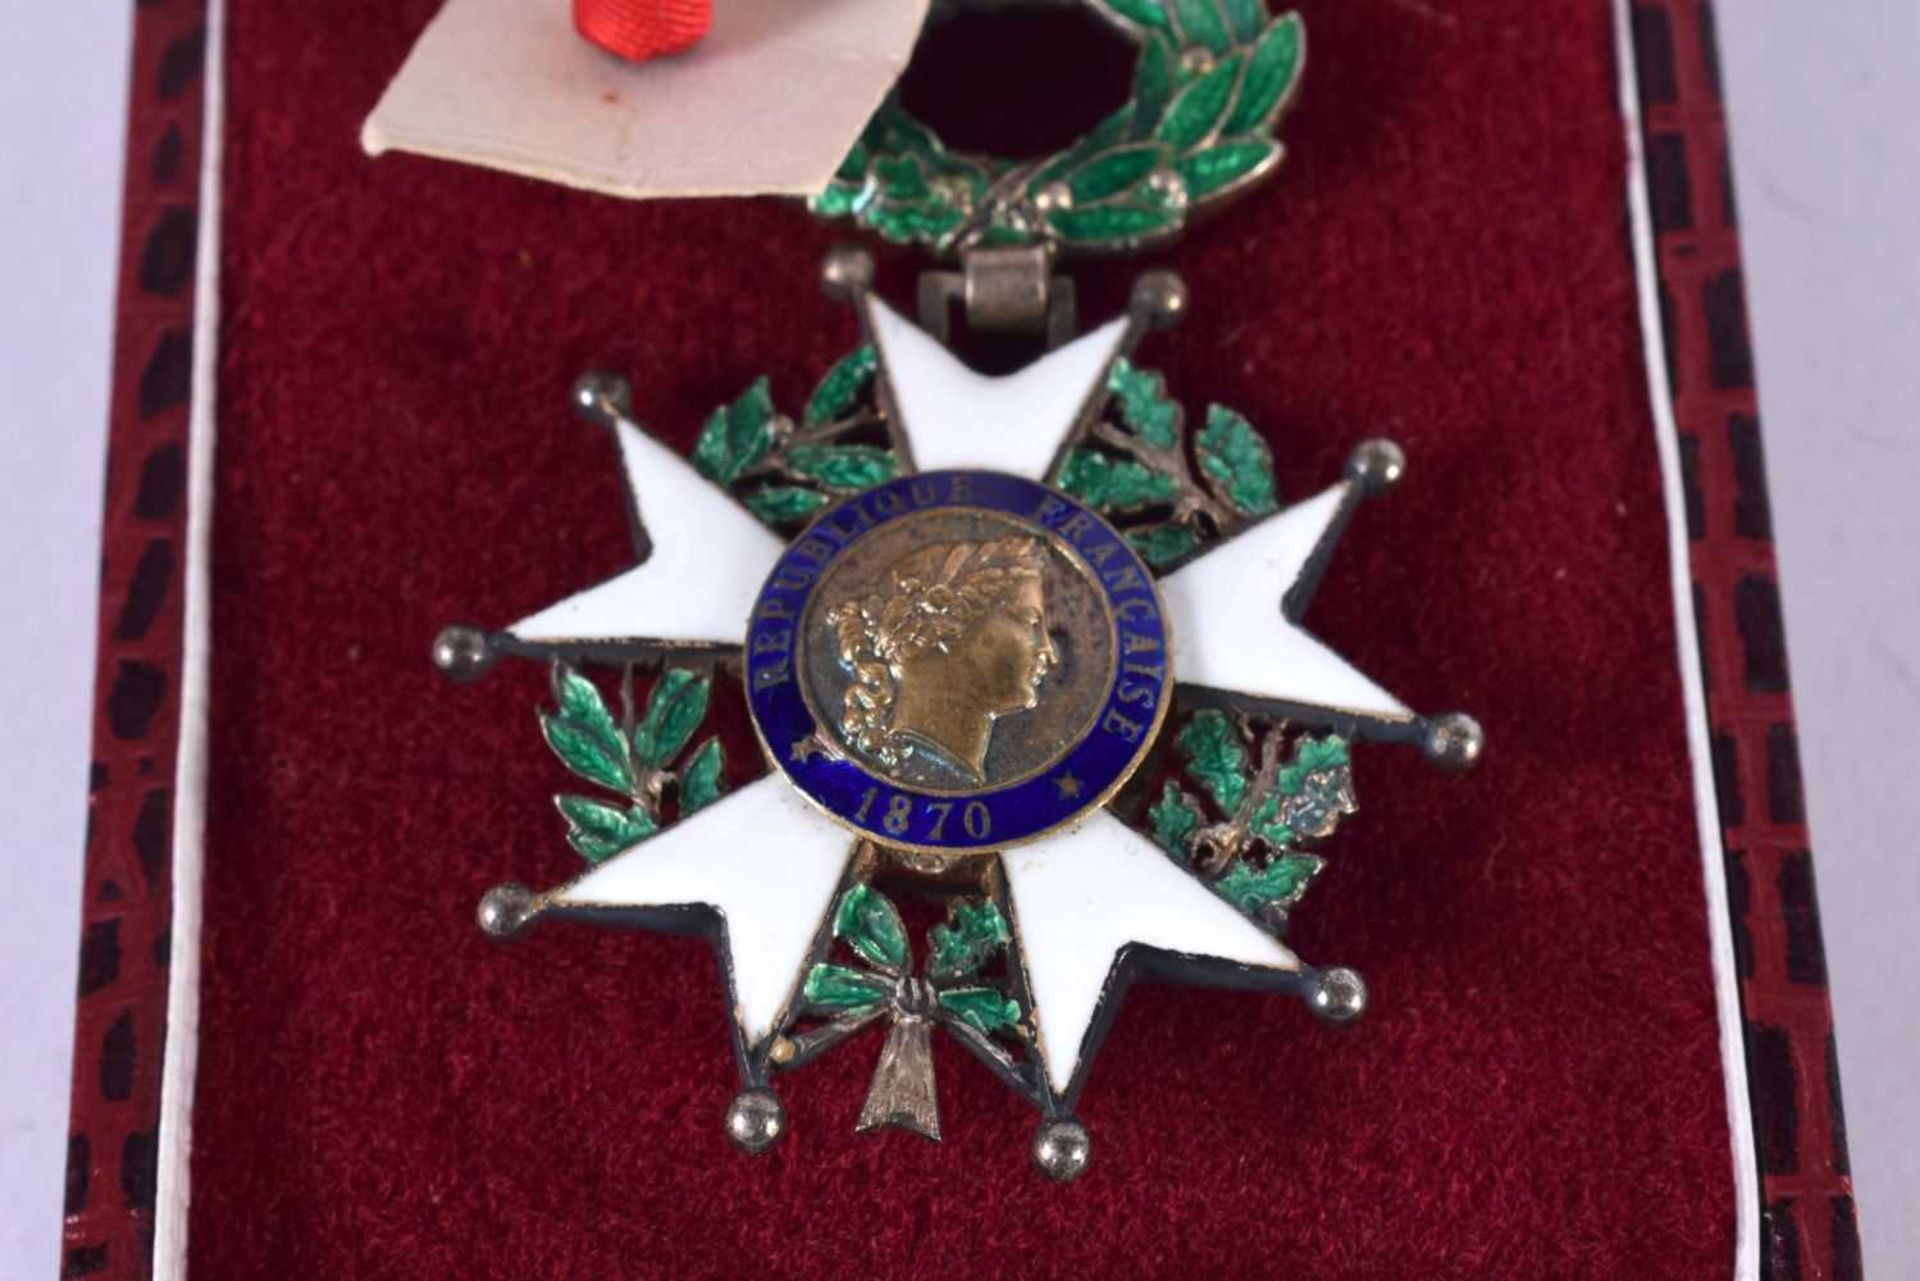 A CASED FRENCH LEGION OF HONOUR MEDAL "1870" WITH RIBBON - Image 2 of 5